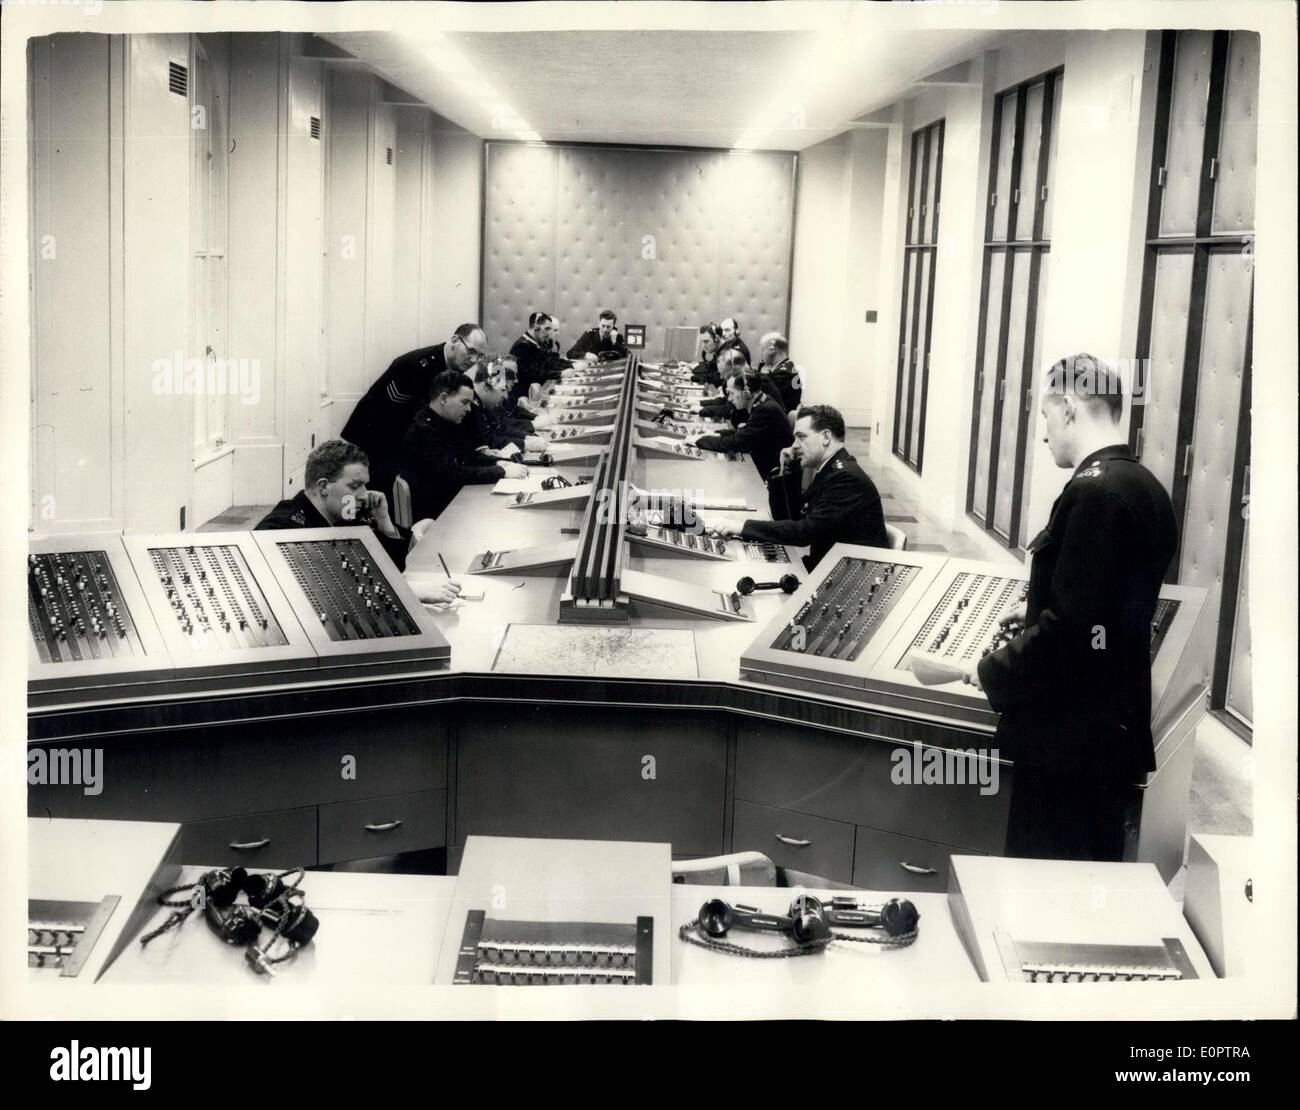 Dec. 28, 1956 - Scotland Yard's New Information Room: Scotland Yard's new Information Room has been designed to met the great increase in 999 calls and to accommodate the new mechanically and electrically aided system of working no to be employed. It deals with incident's in the whole of the Metropolitan and city police districts - an ware of 736 square miles and a population of 8 1/2 million, The Information Room is a clearing centre where information about matters requiring police attention is received and distributed Stock Photo